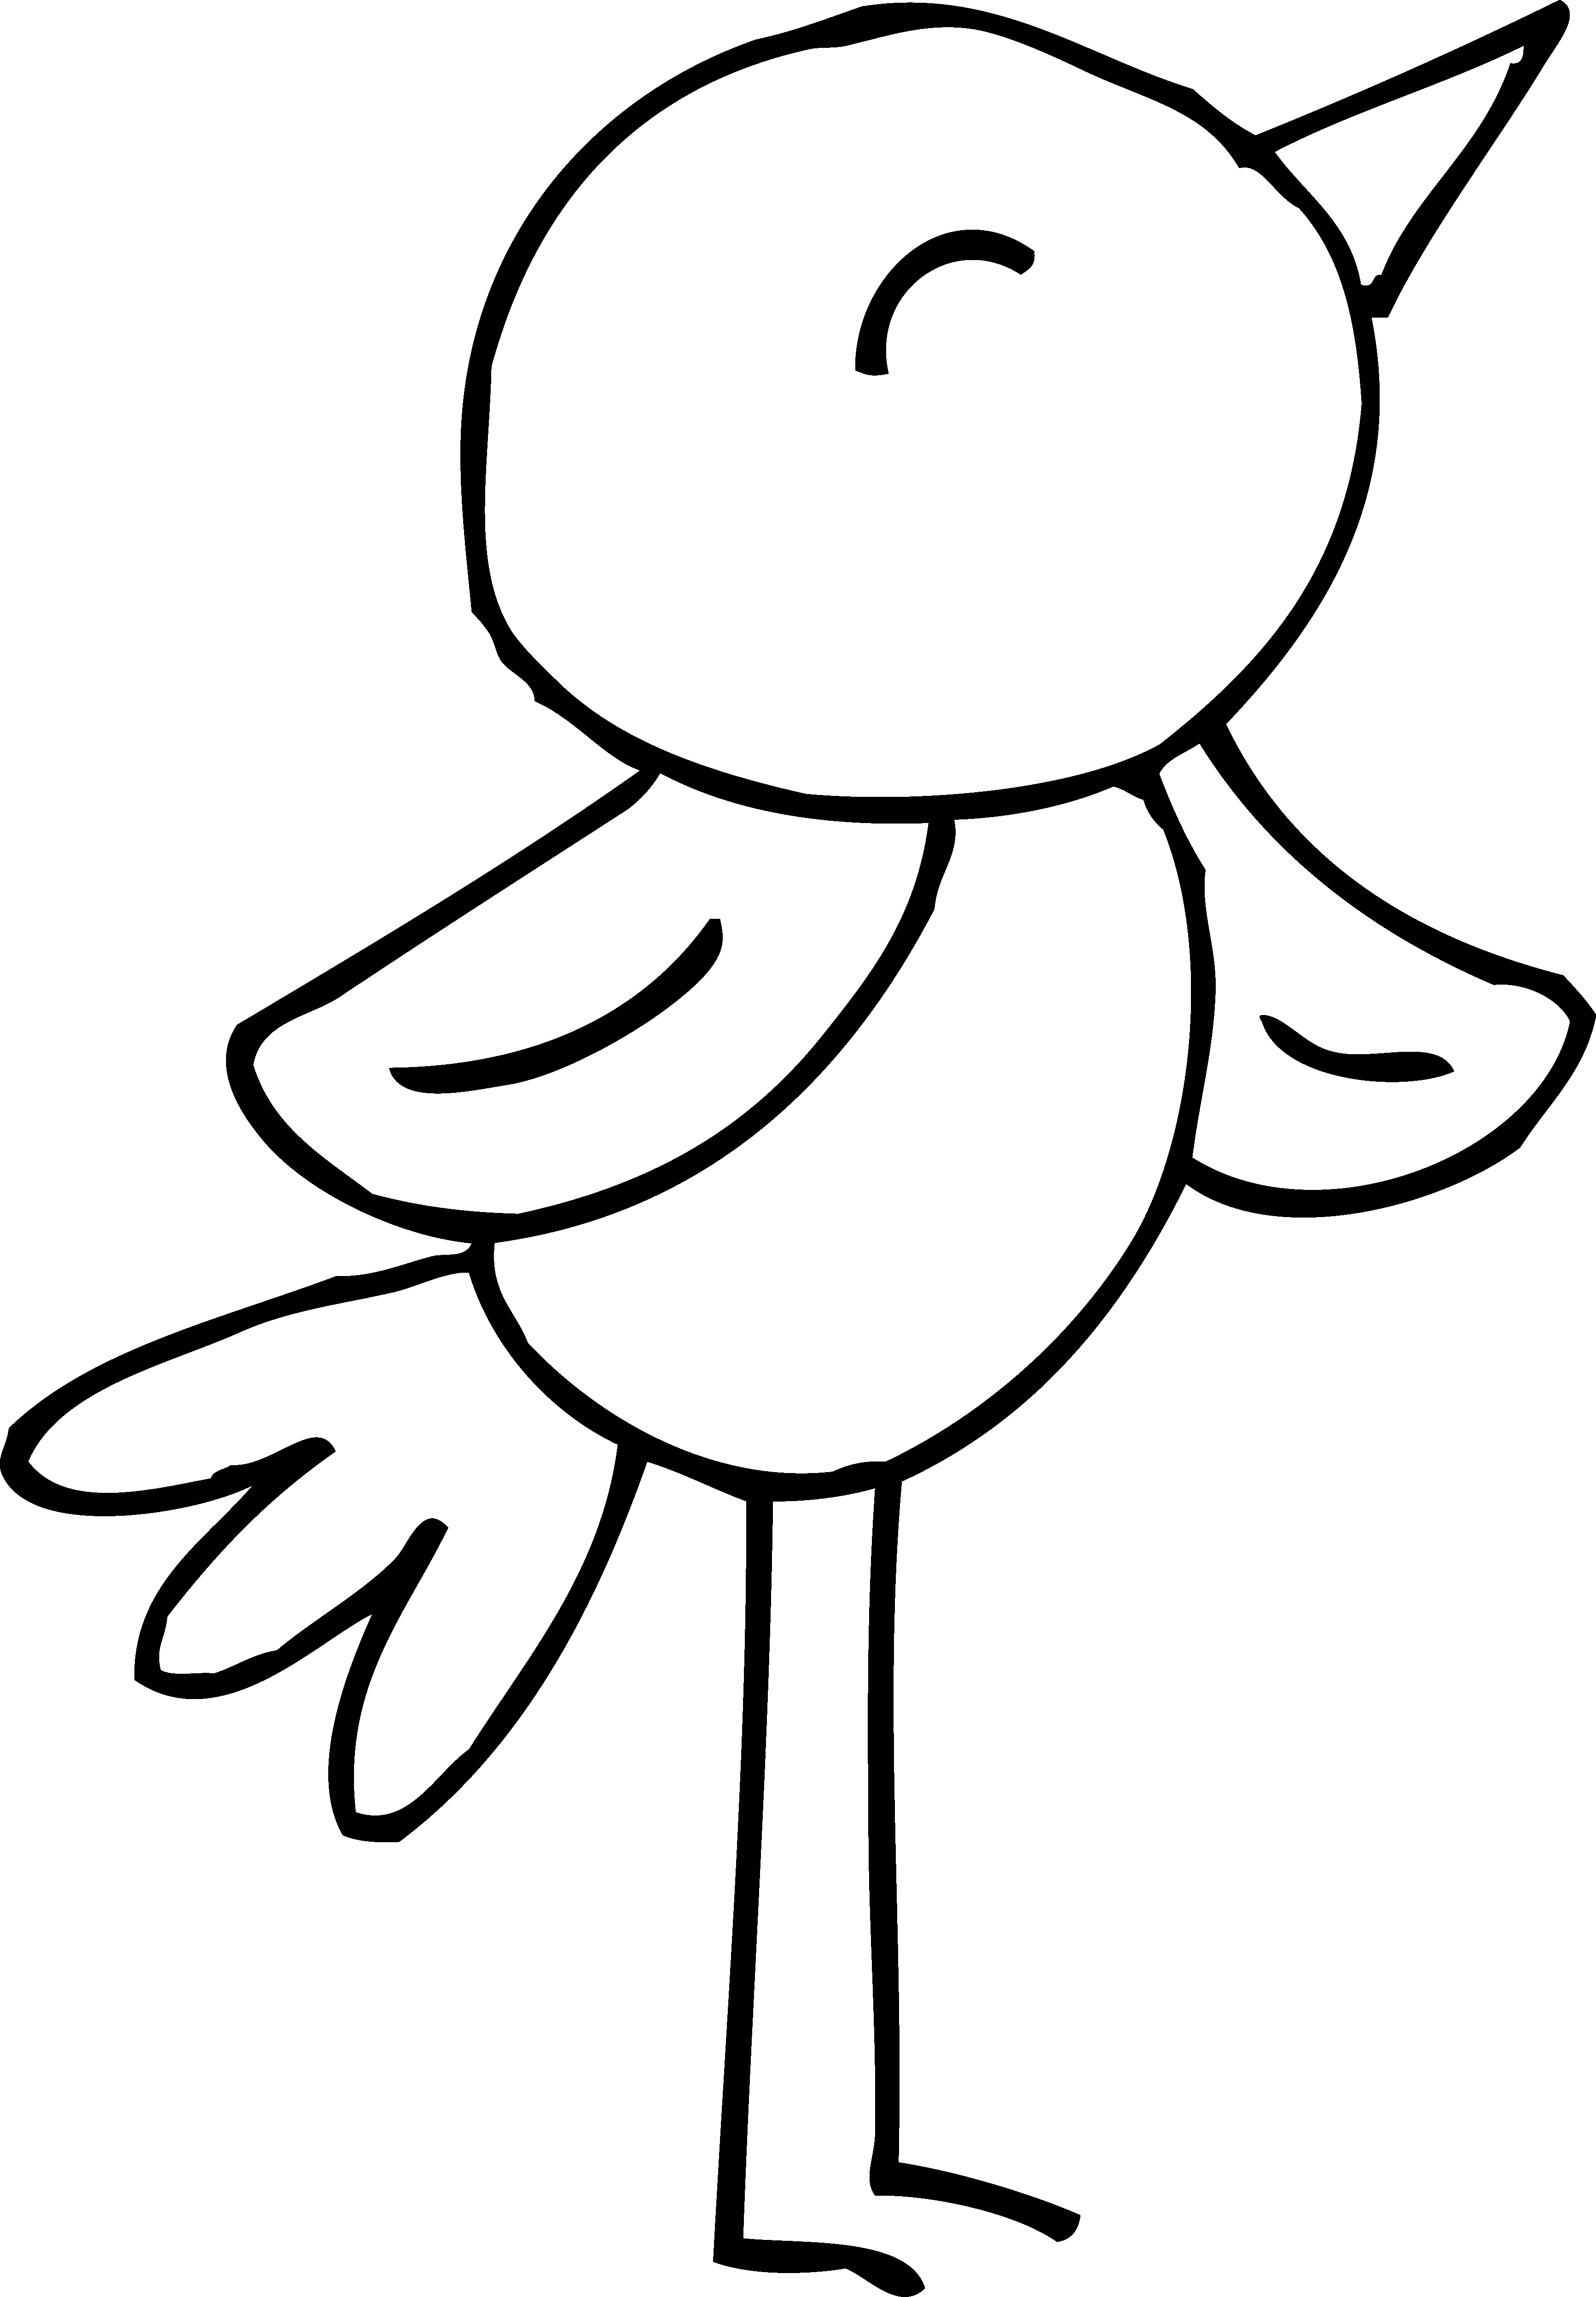 Clipart Fish Black And White | Clipart Panda - Free Clipart Images